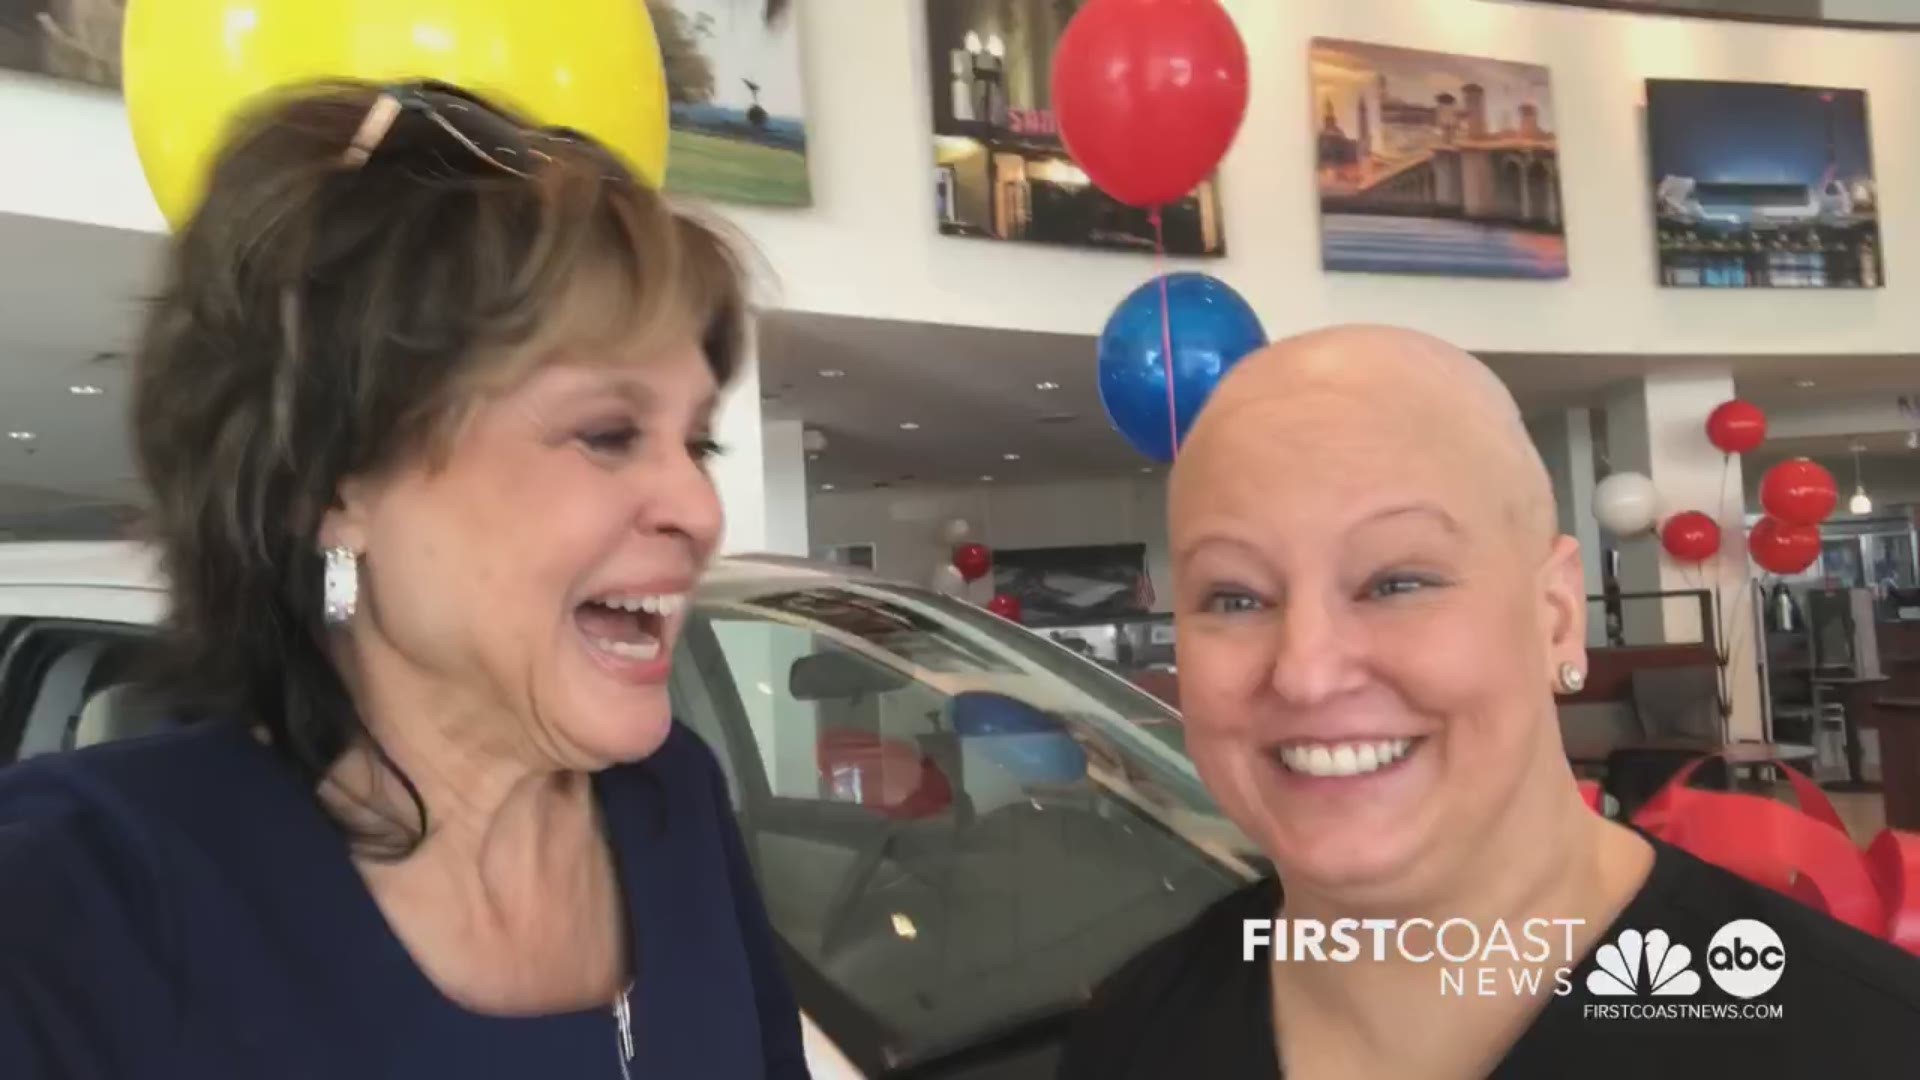 The Jacksonville community showed an outpouring of support for this mom battling cancer after seeing a First Coast News On Your Side story. So heartwarming!